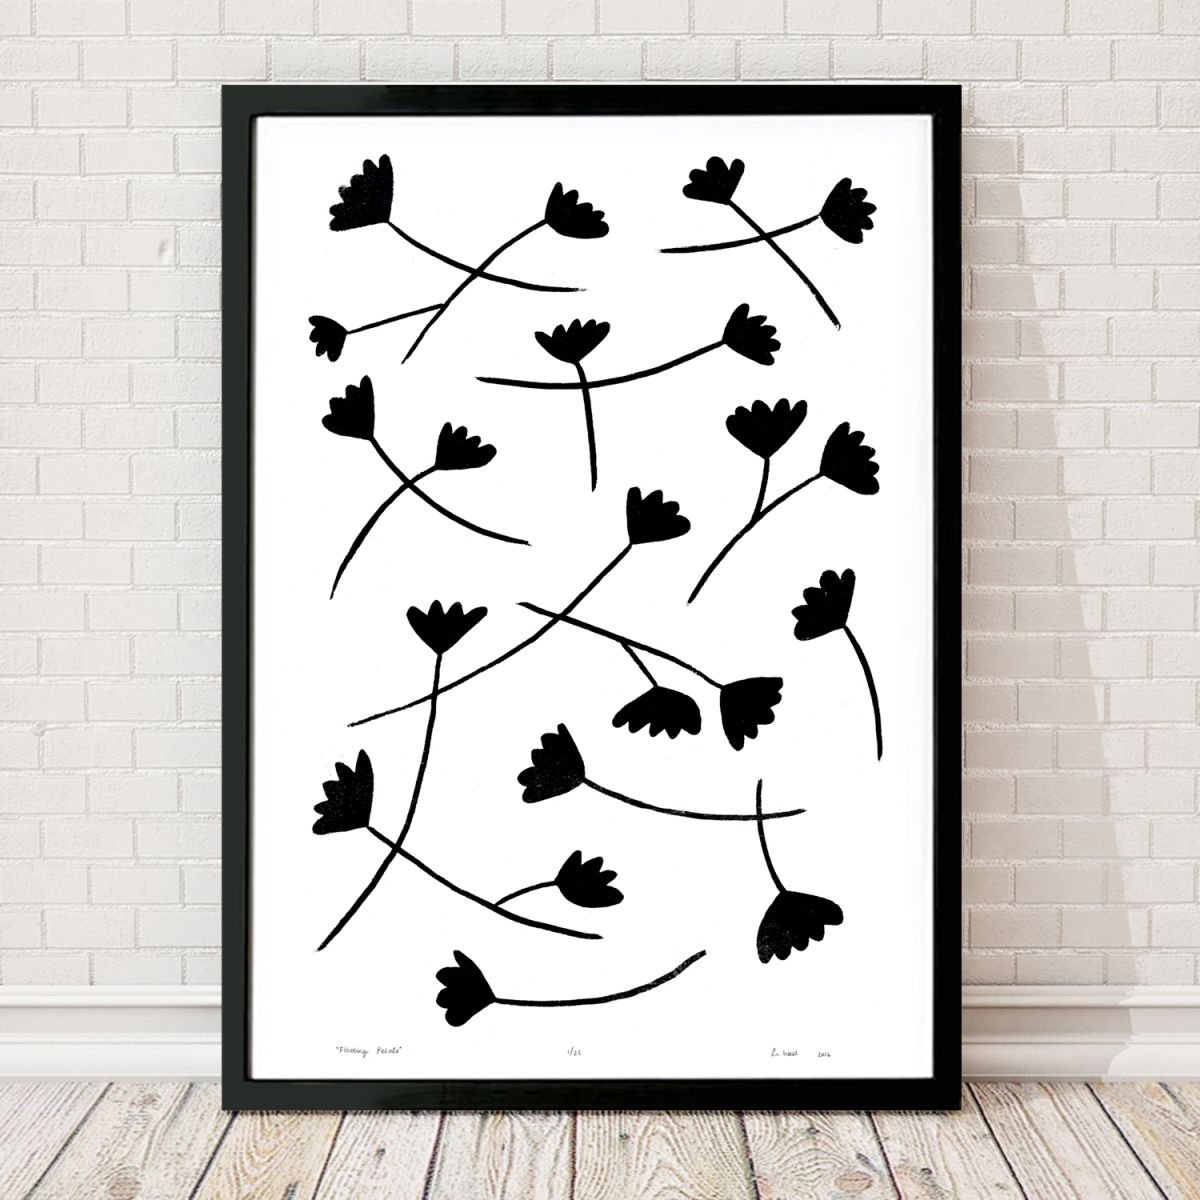 Floating Petals in Black on White - Framed - FREE UK Delivery by Lu West